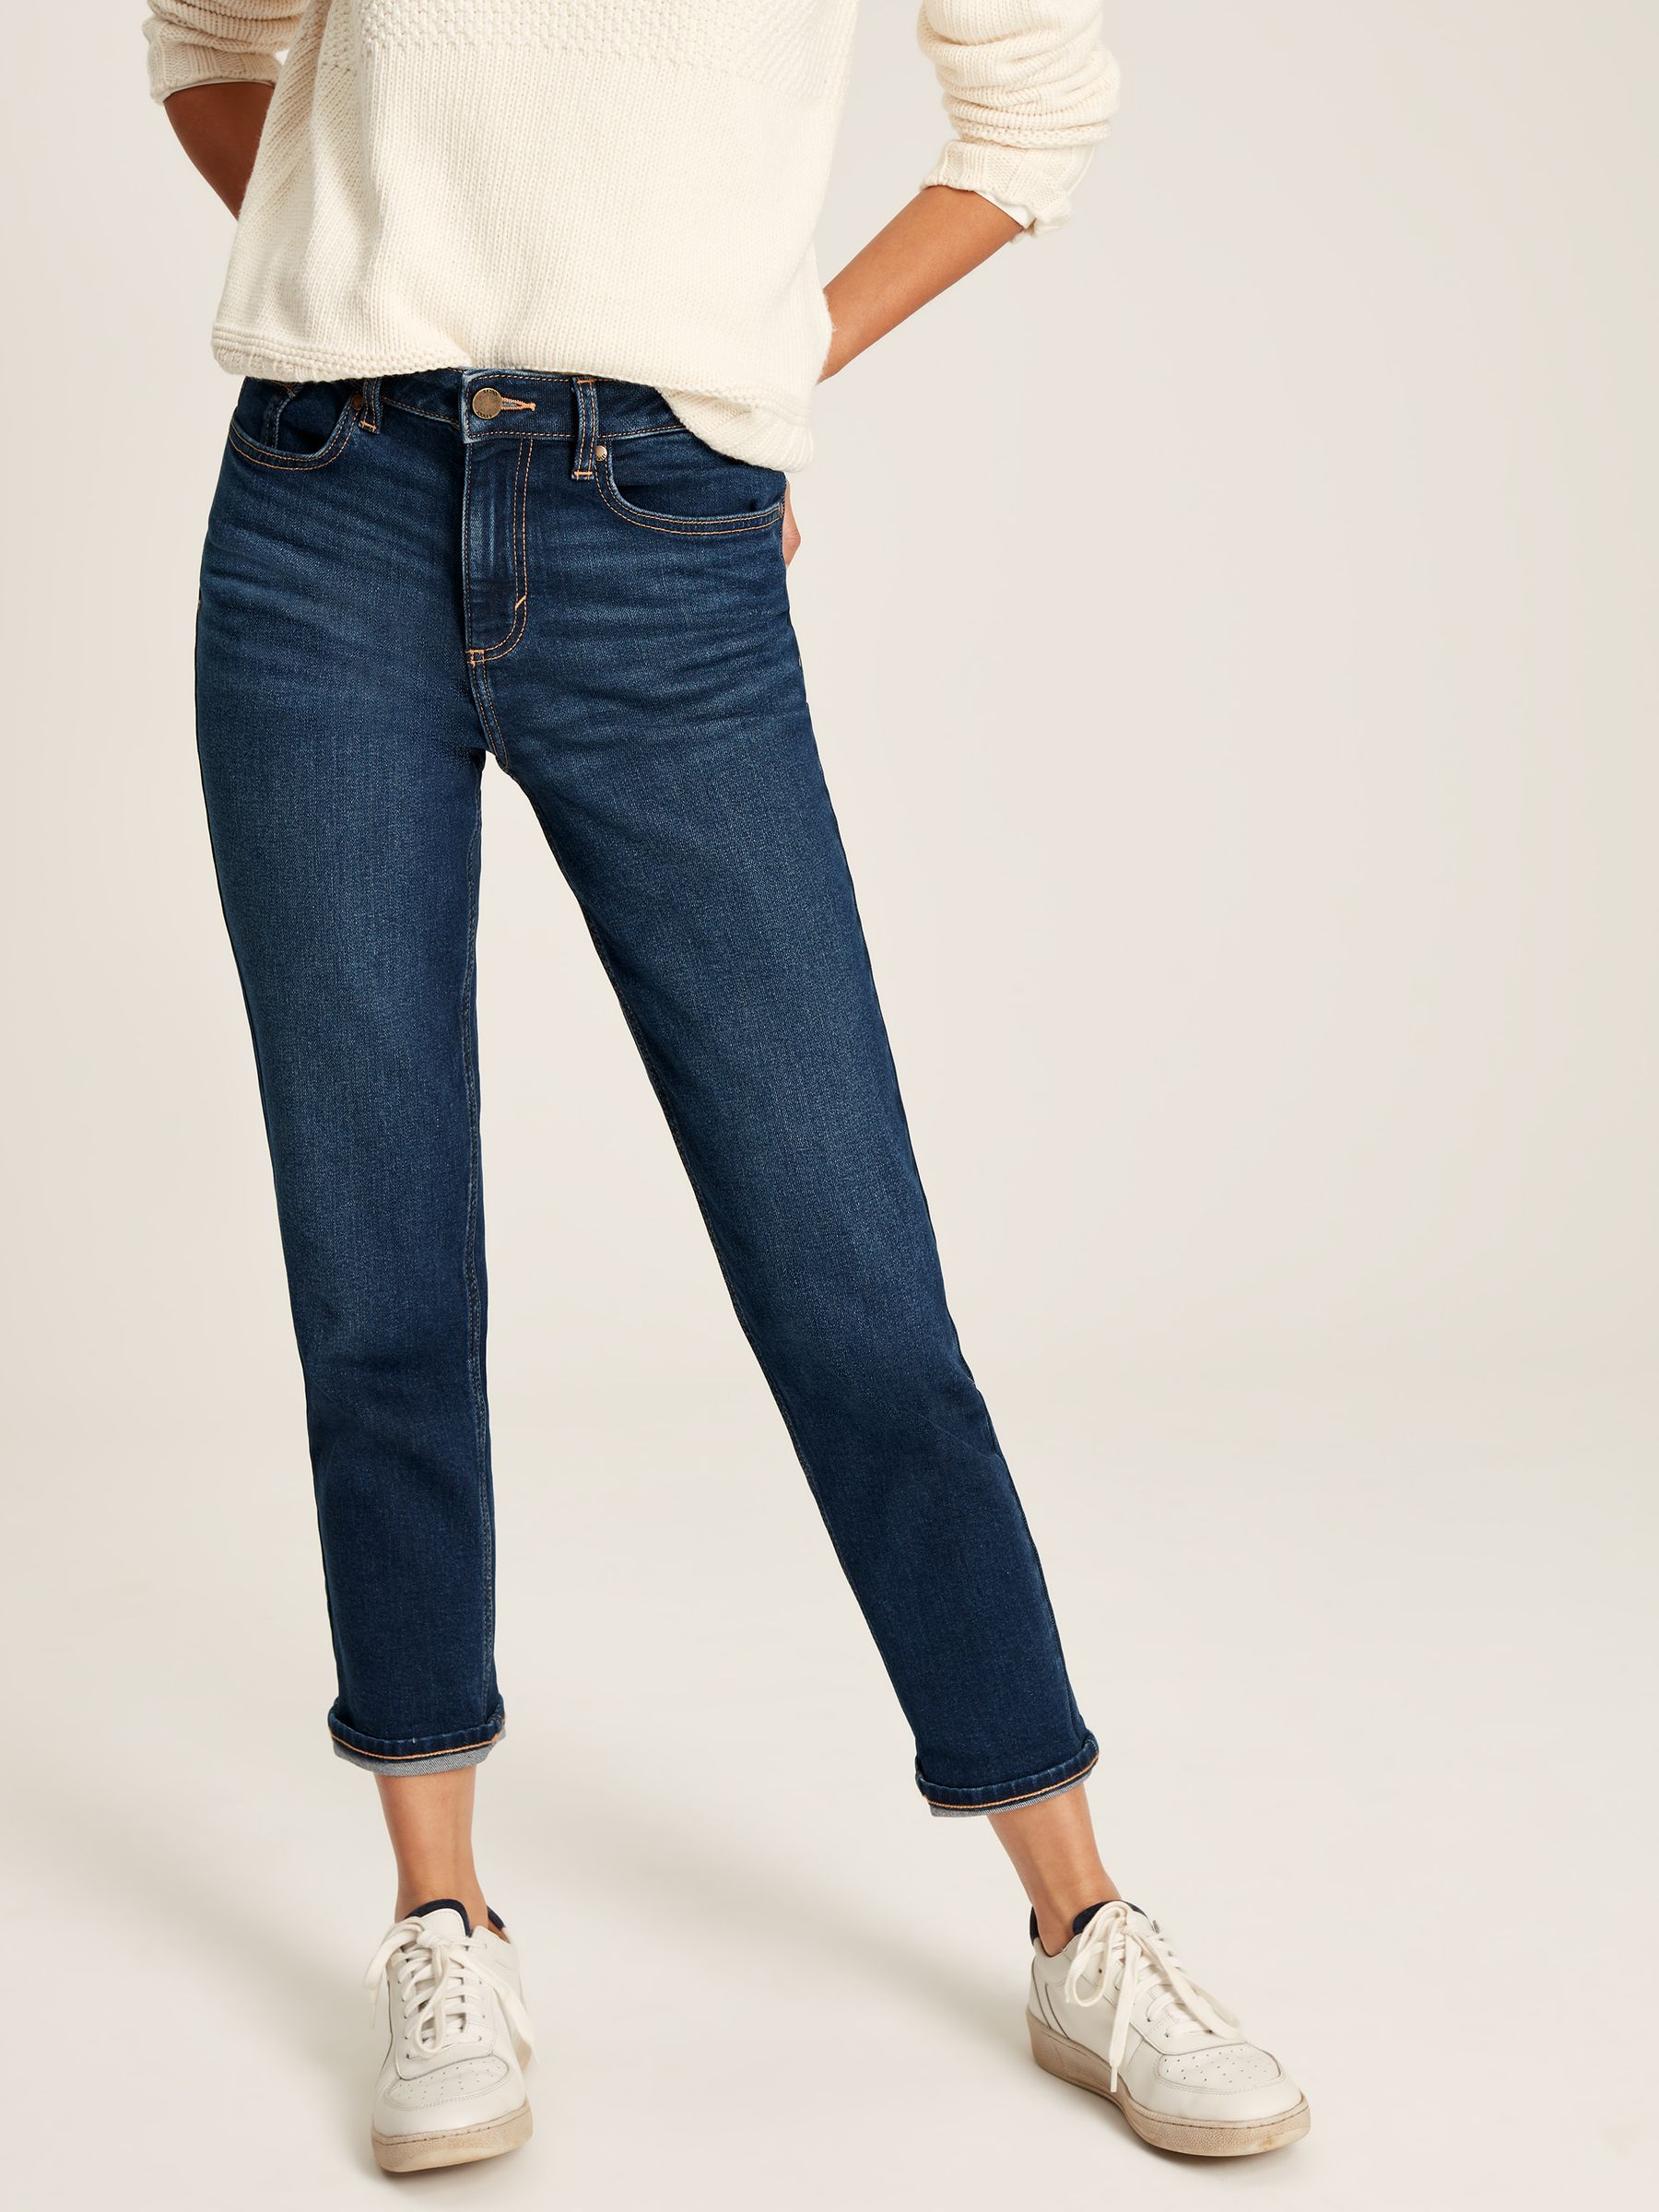 Buy Joules Slim Straight Jeans from the Joules online shop